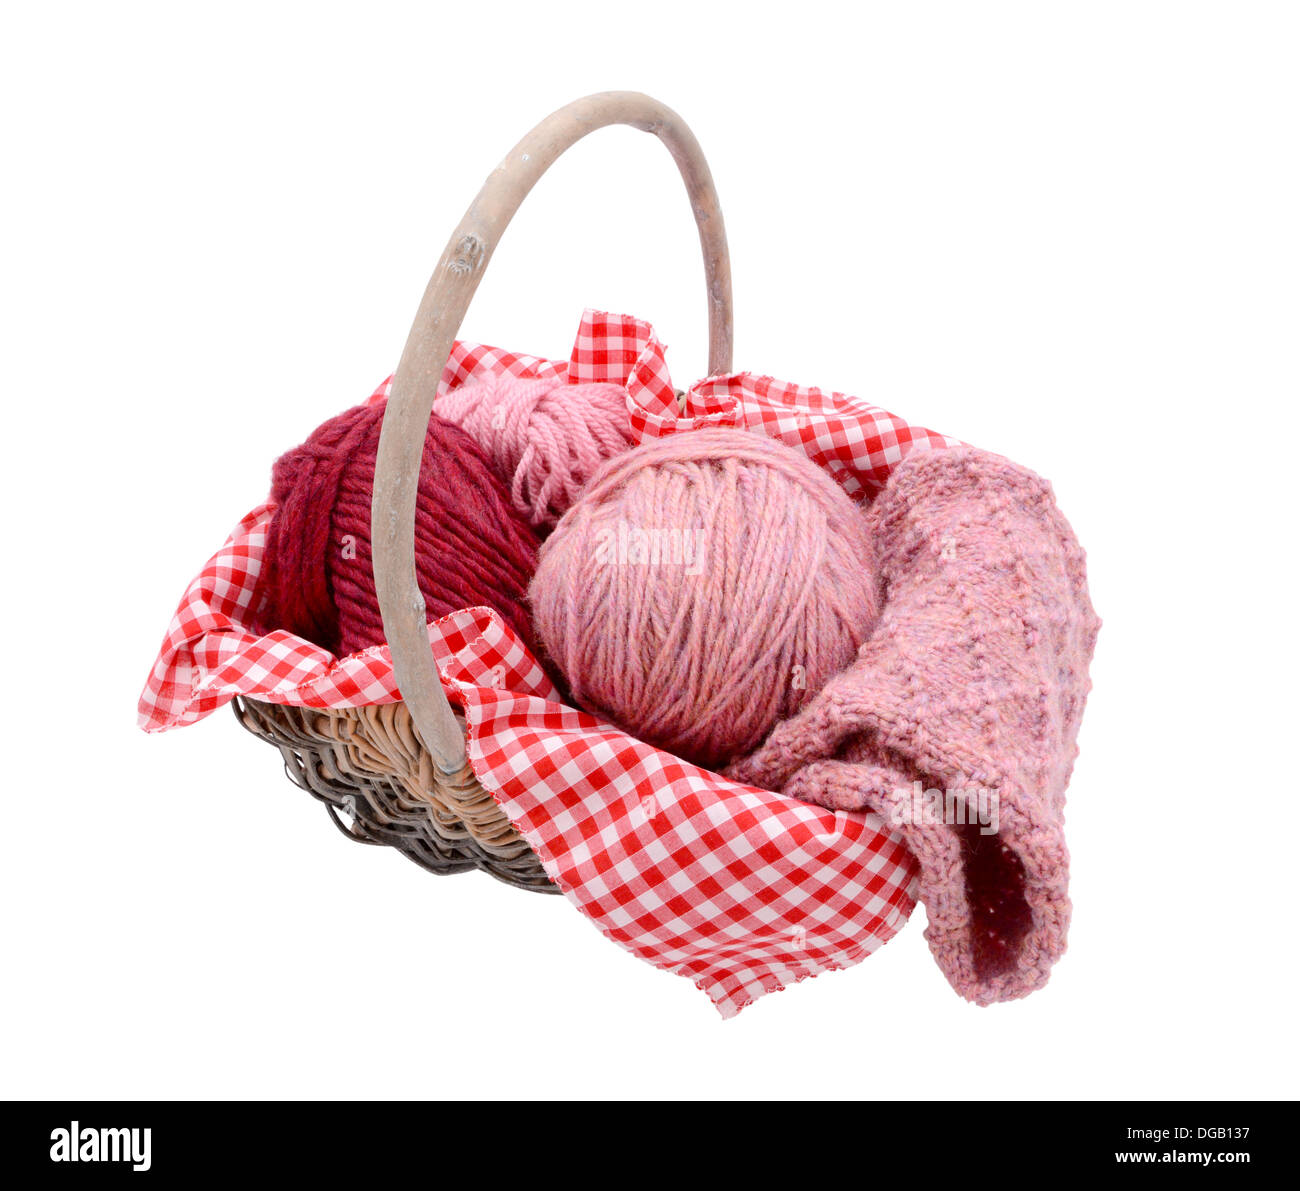 Pink and red balls of wool with patterned knitting in a basket, isolated on a white background Stock Photo